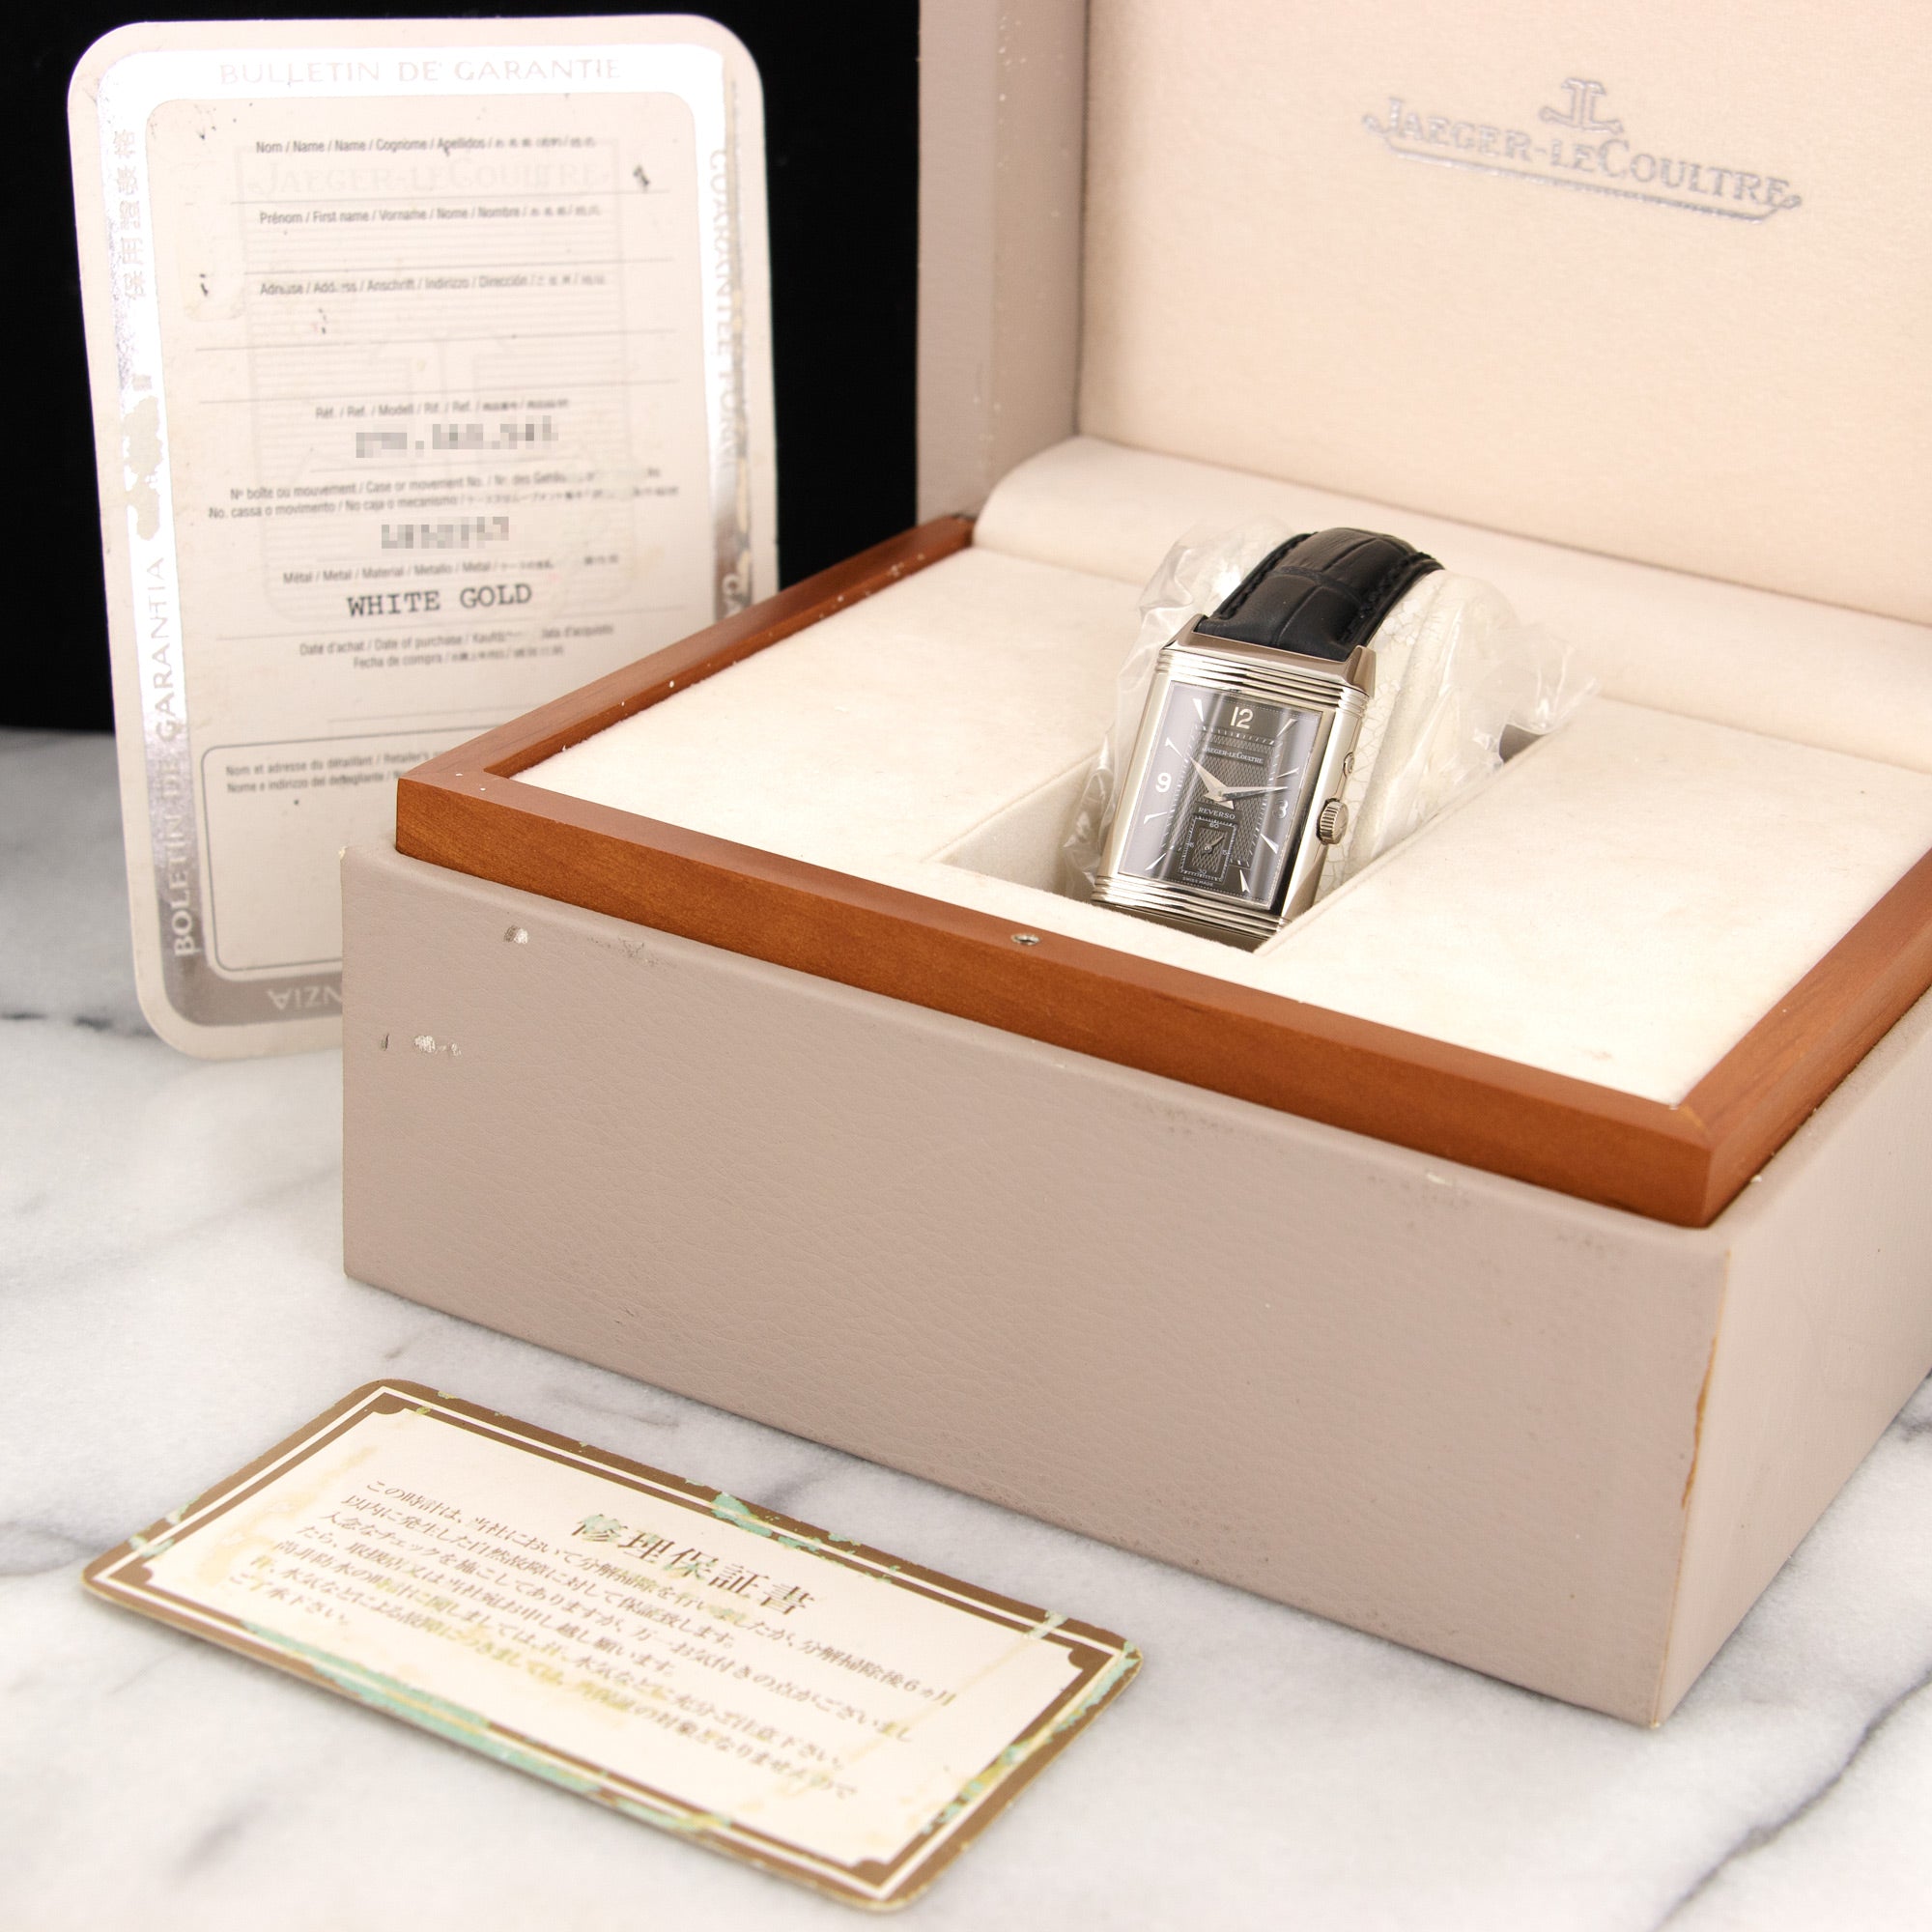 Jaeger LeCoultre - Jaeger Lecoultre White Gold Reverso Day-Night Watch - The Keystone Watches